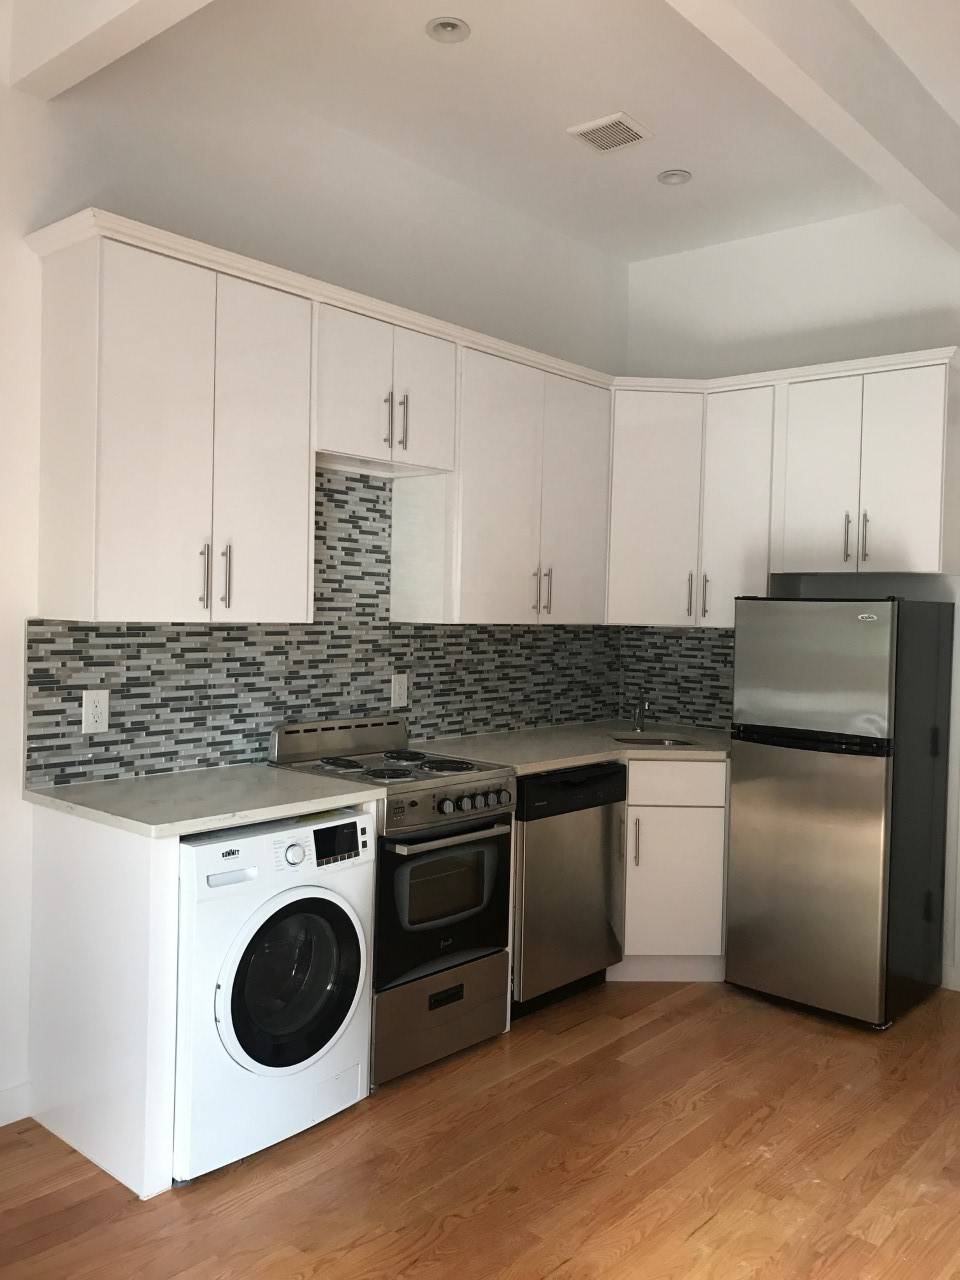 SUGAR HILL, Hamilton Heights Gut Renovated ONE BED, ACBD stop around the corner!